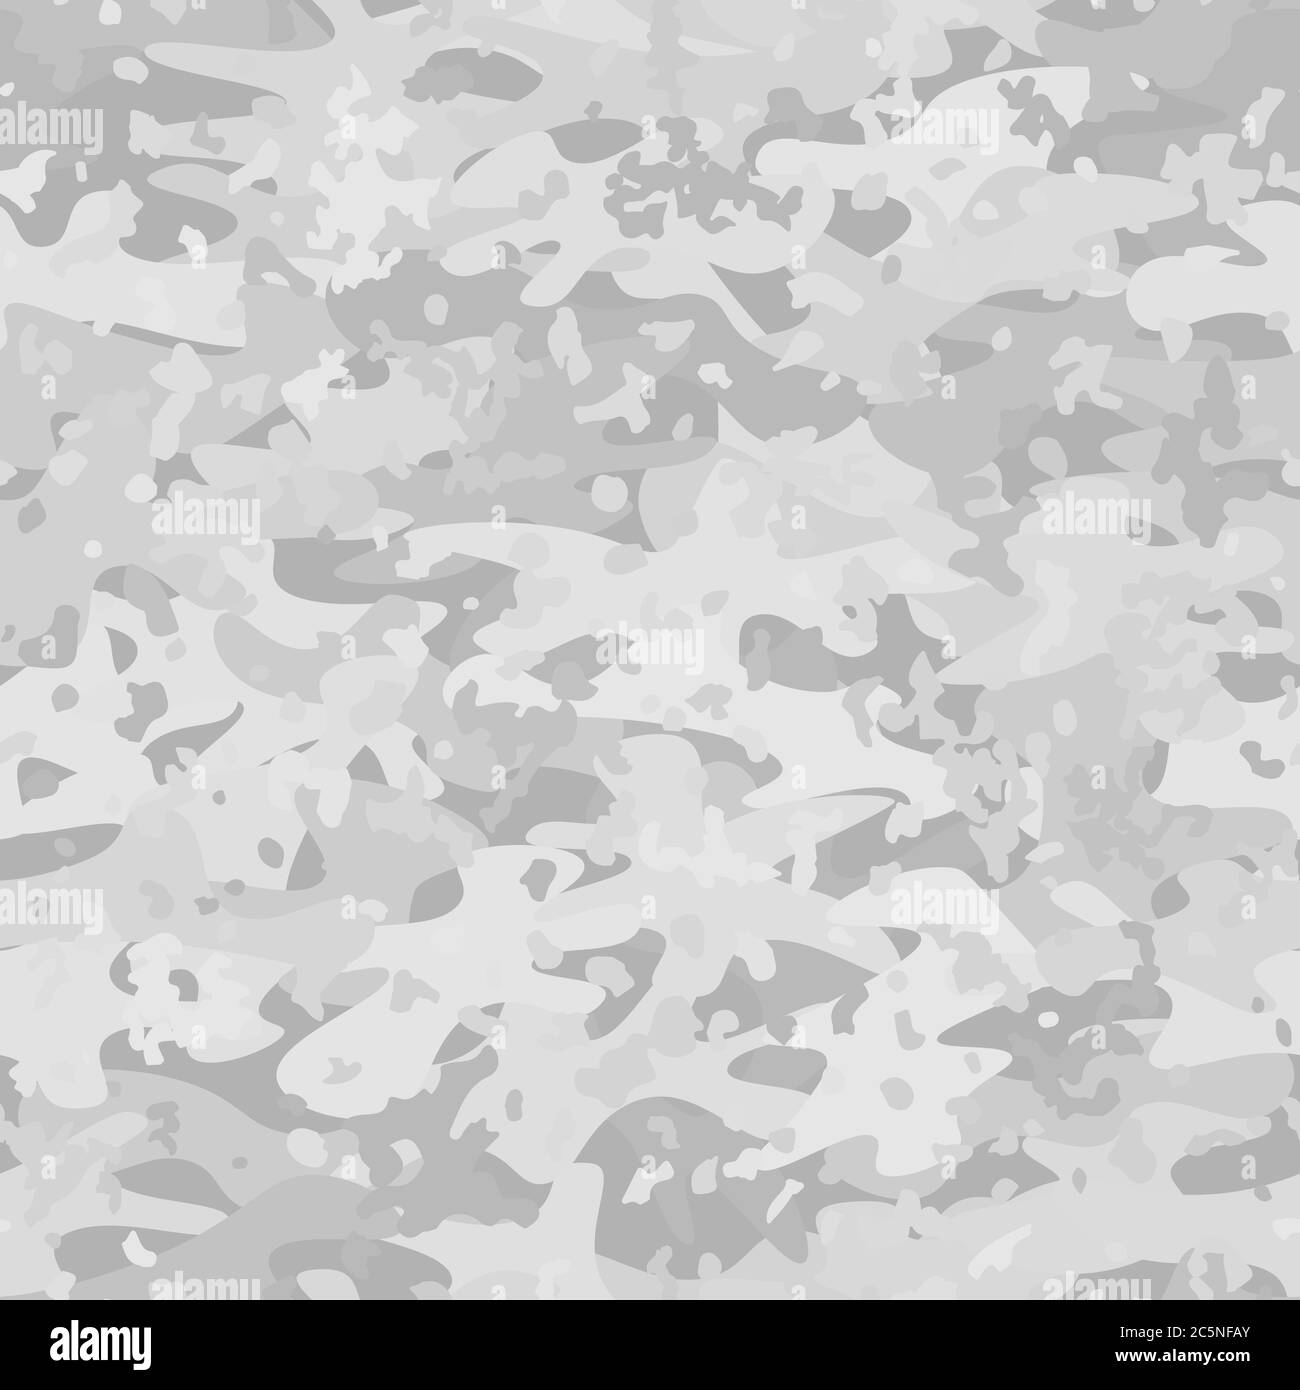 Camouflage seamless pattern background. Classic clothing style